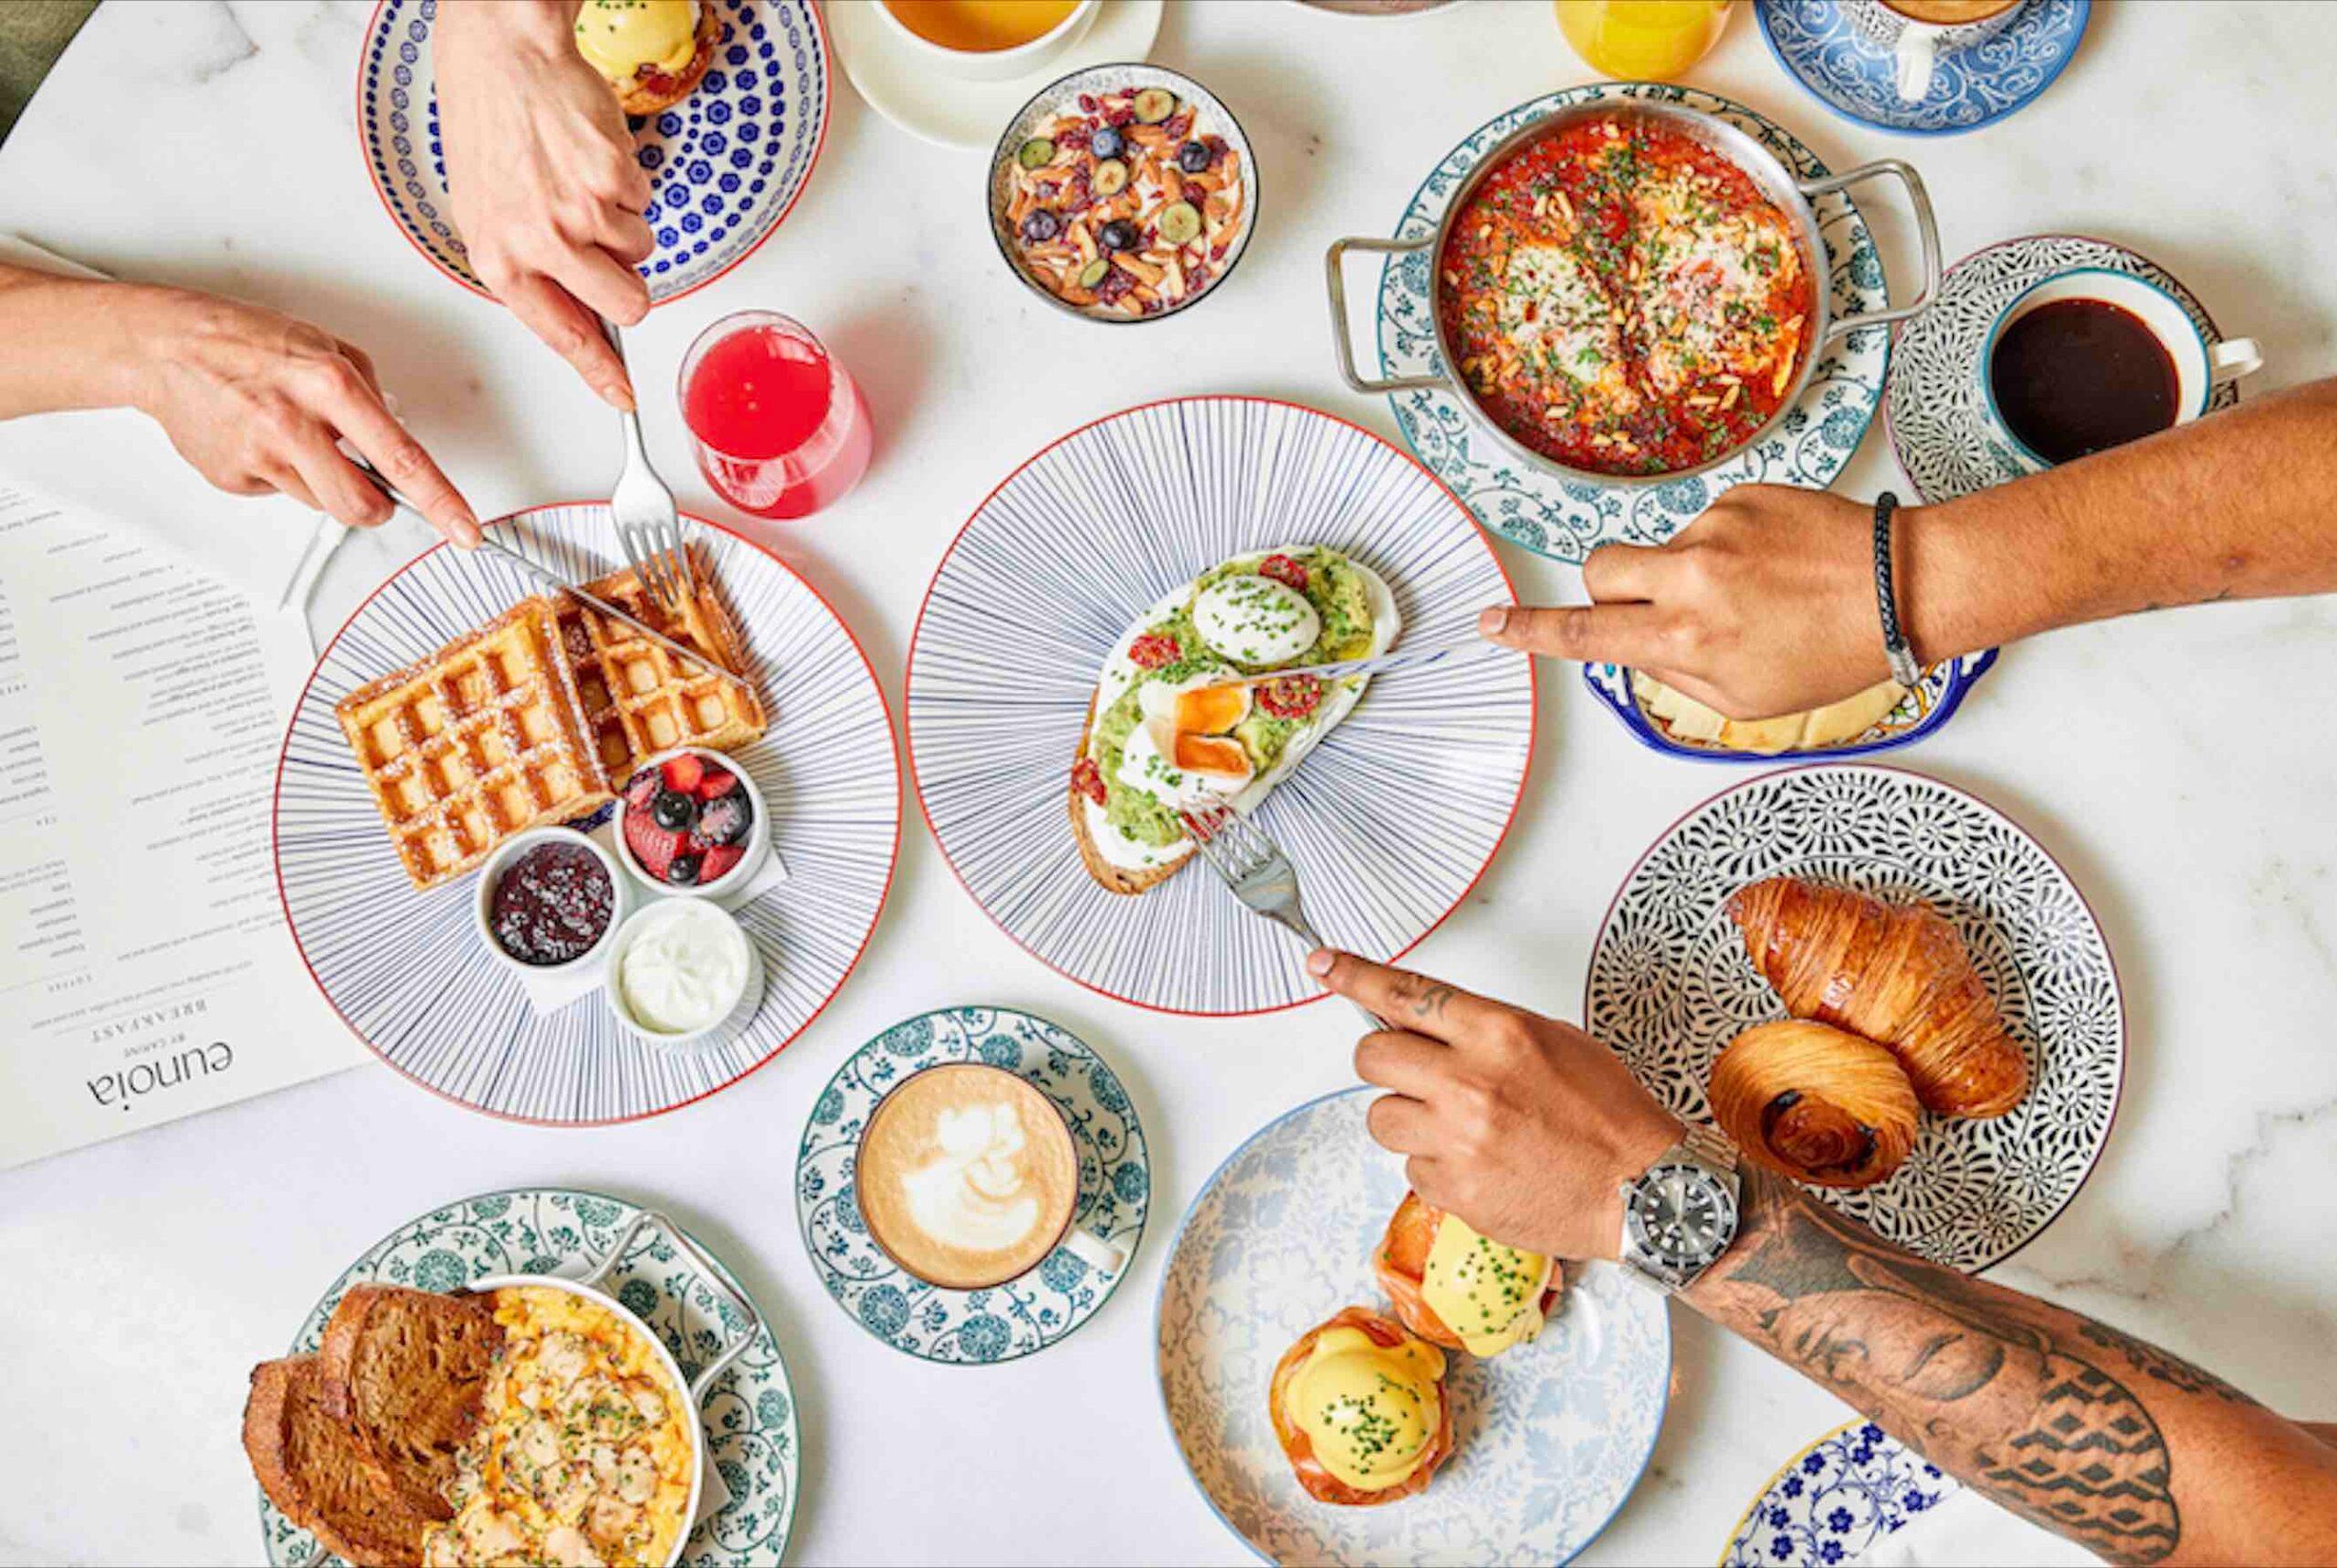 35 of the best breakfasts in Dubai: Croissants, crêpes and coffee-image